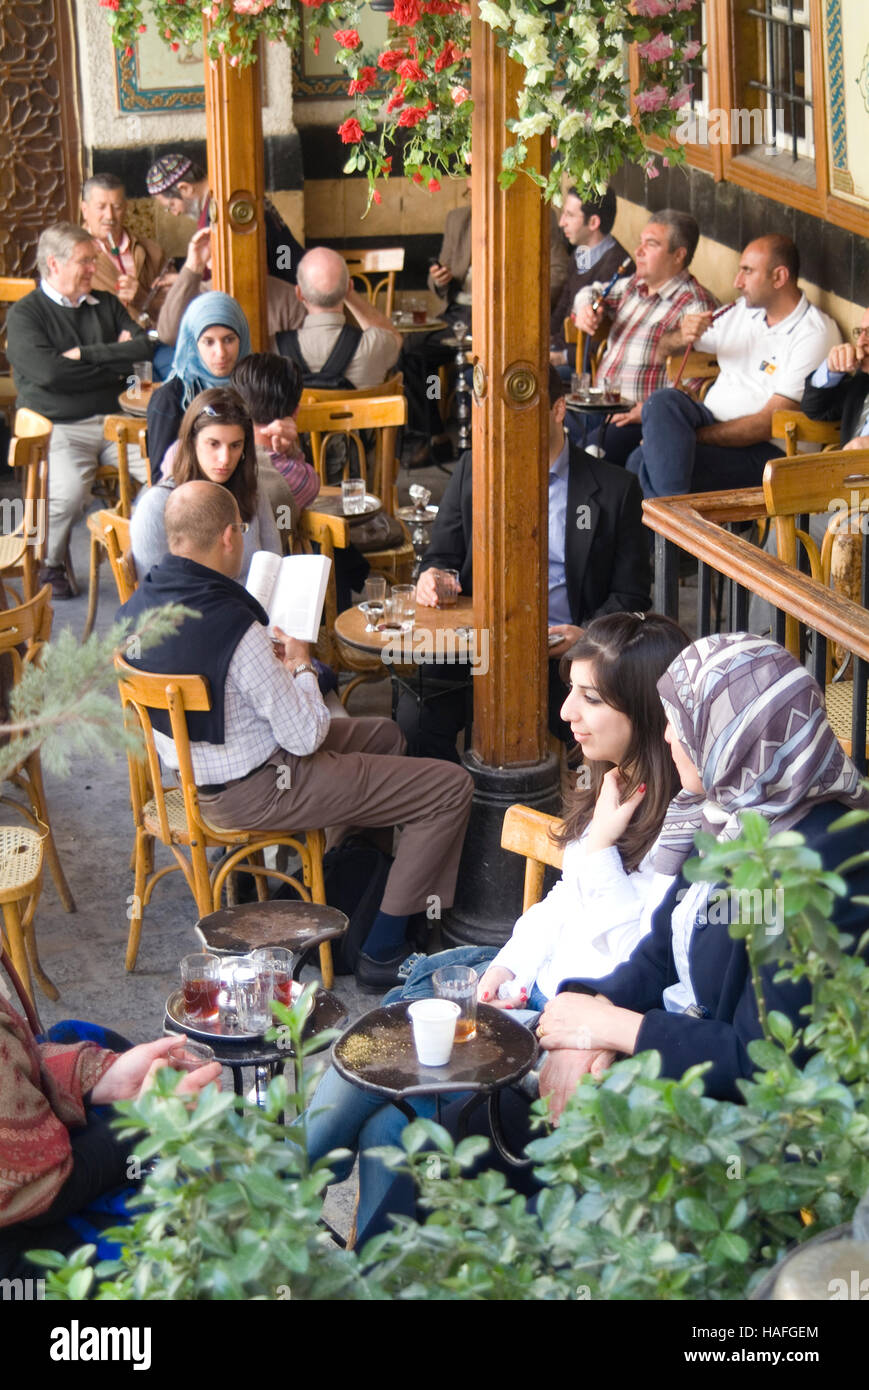 Relaxing over a shisha pipe at Al Nofaraa Cafe in the Old Town of Damascus, Syria. Stock Photo